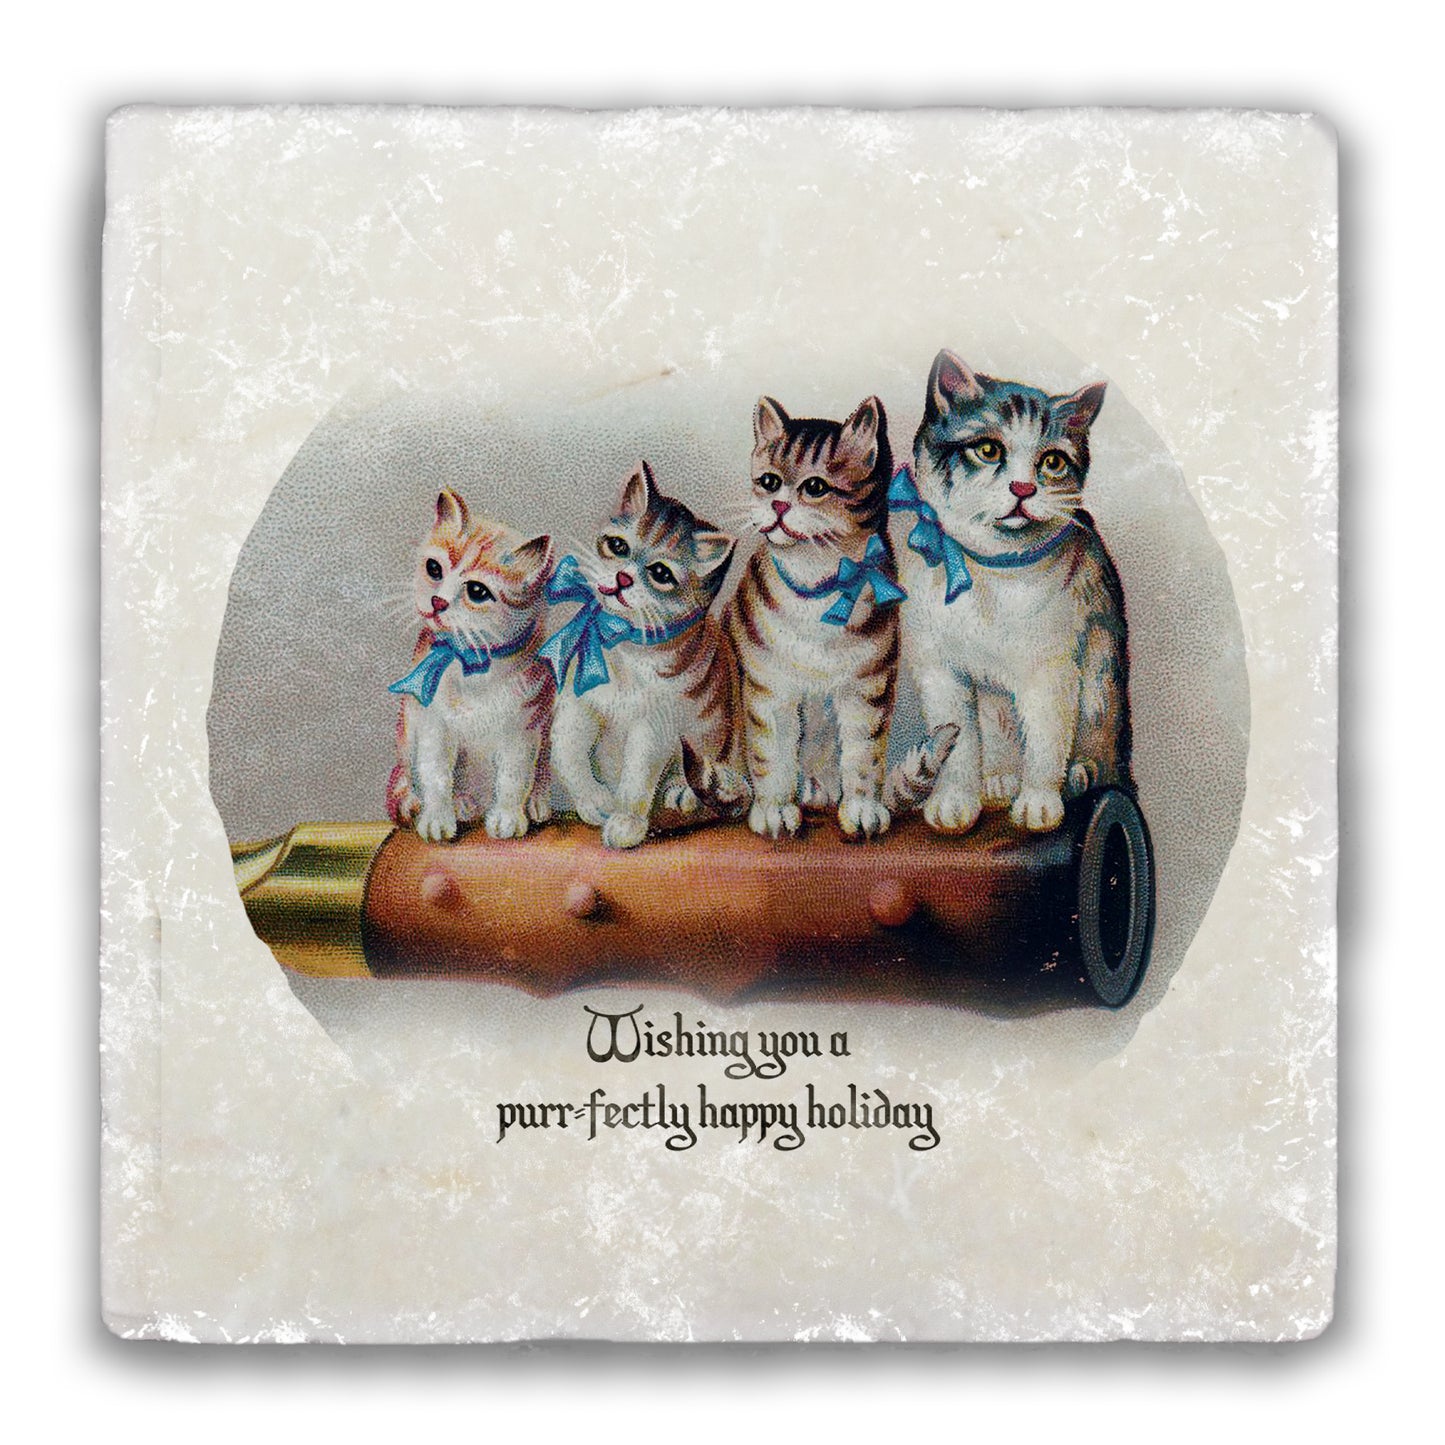 Wishing You a Purr-fectly Happy Holiday Tumbled Stone Coaster